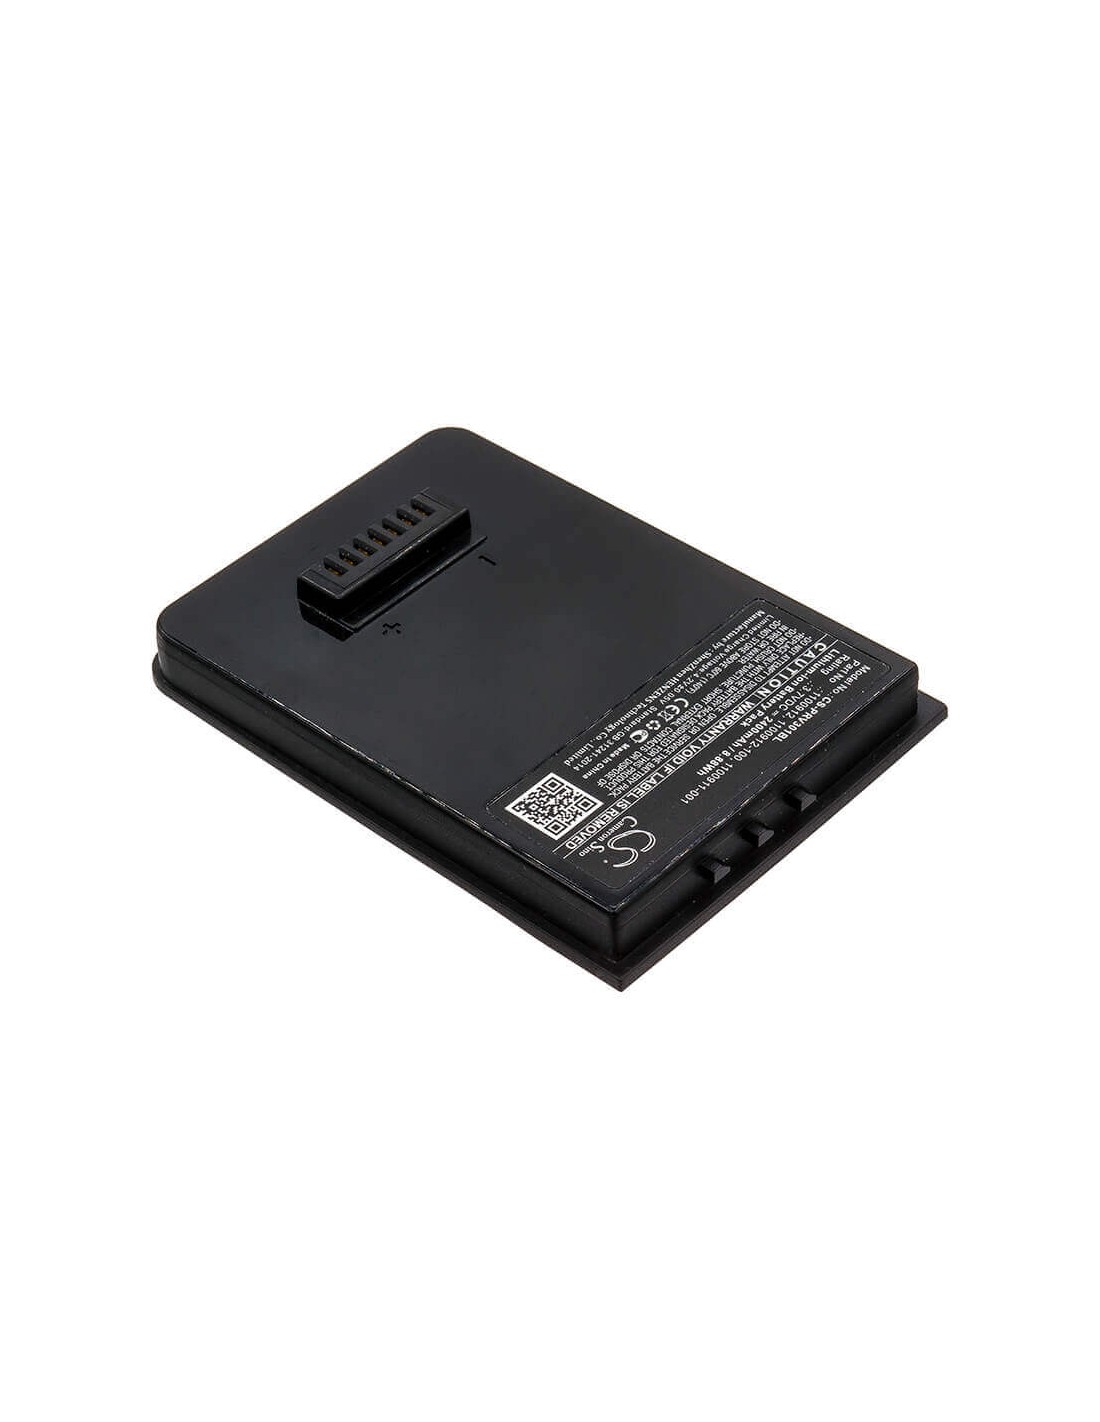 Battery for Psion, Ep10, Ep1031002010062a, Ep1031012040062c 3.7V, 2400mAh - 8.88Wh